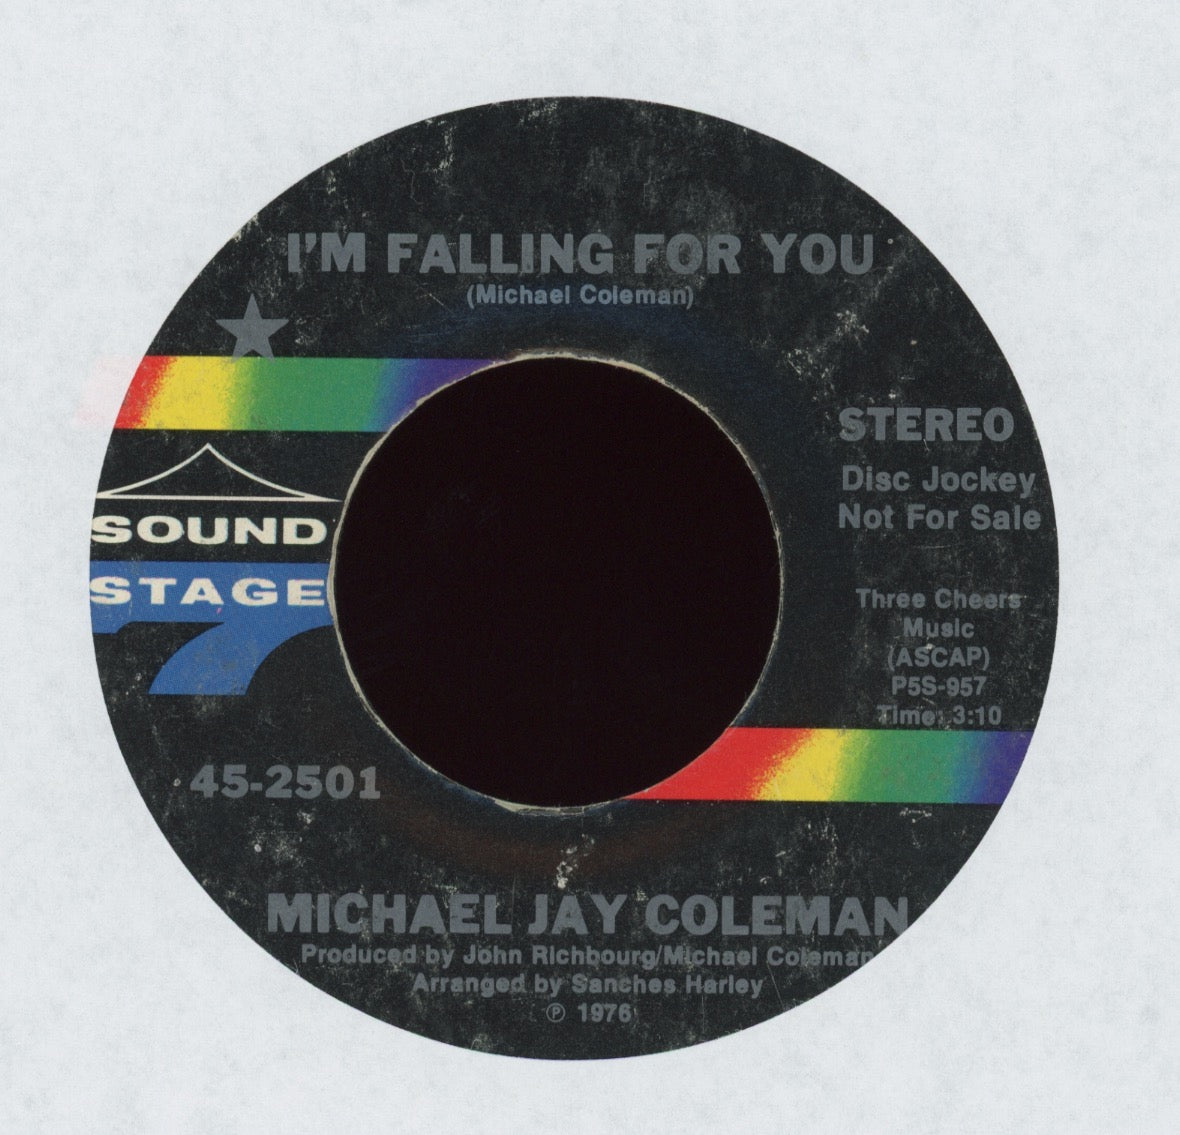 Michael Jay Coleman - I'm Falling For You on Sound Stage 7 Promo